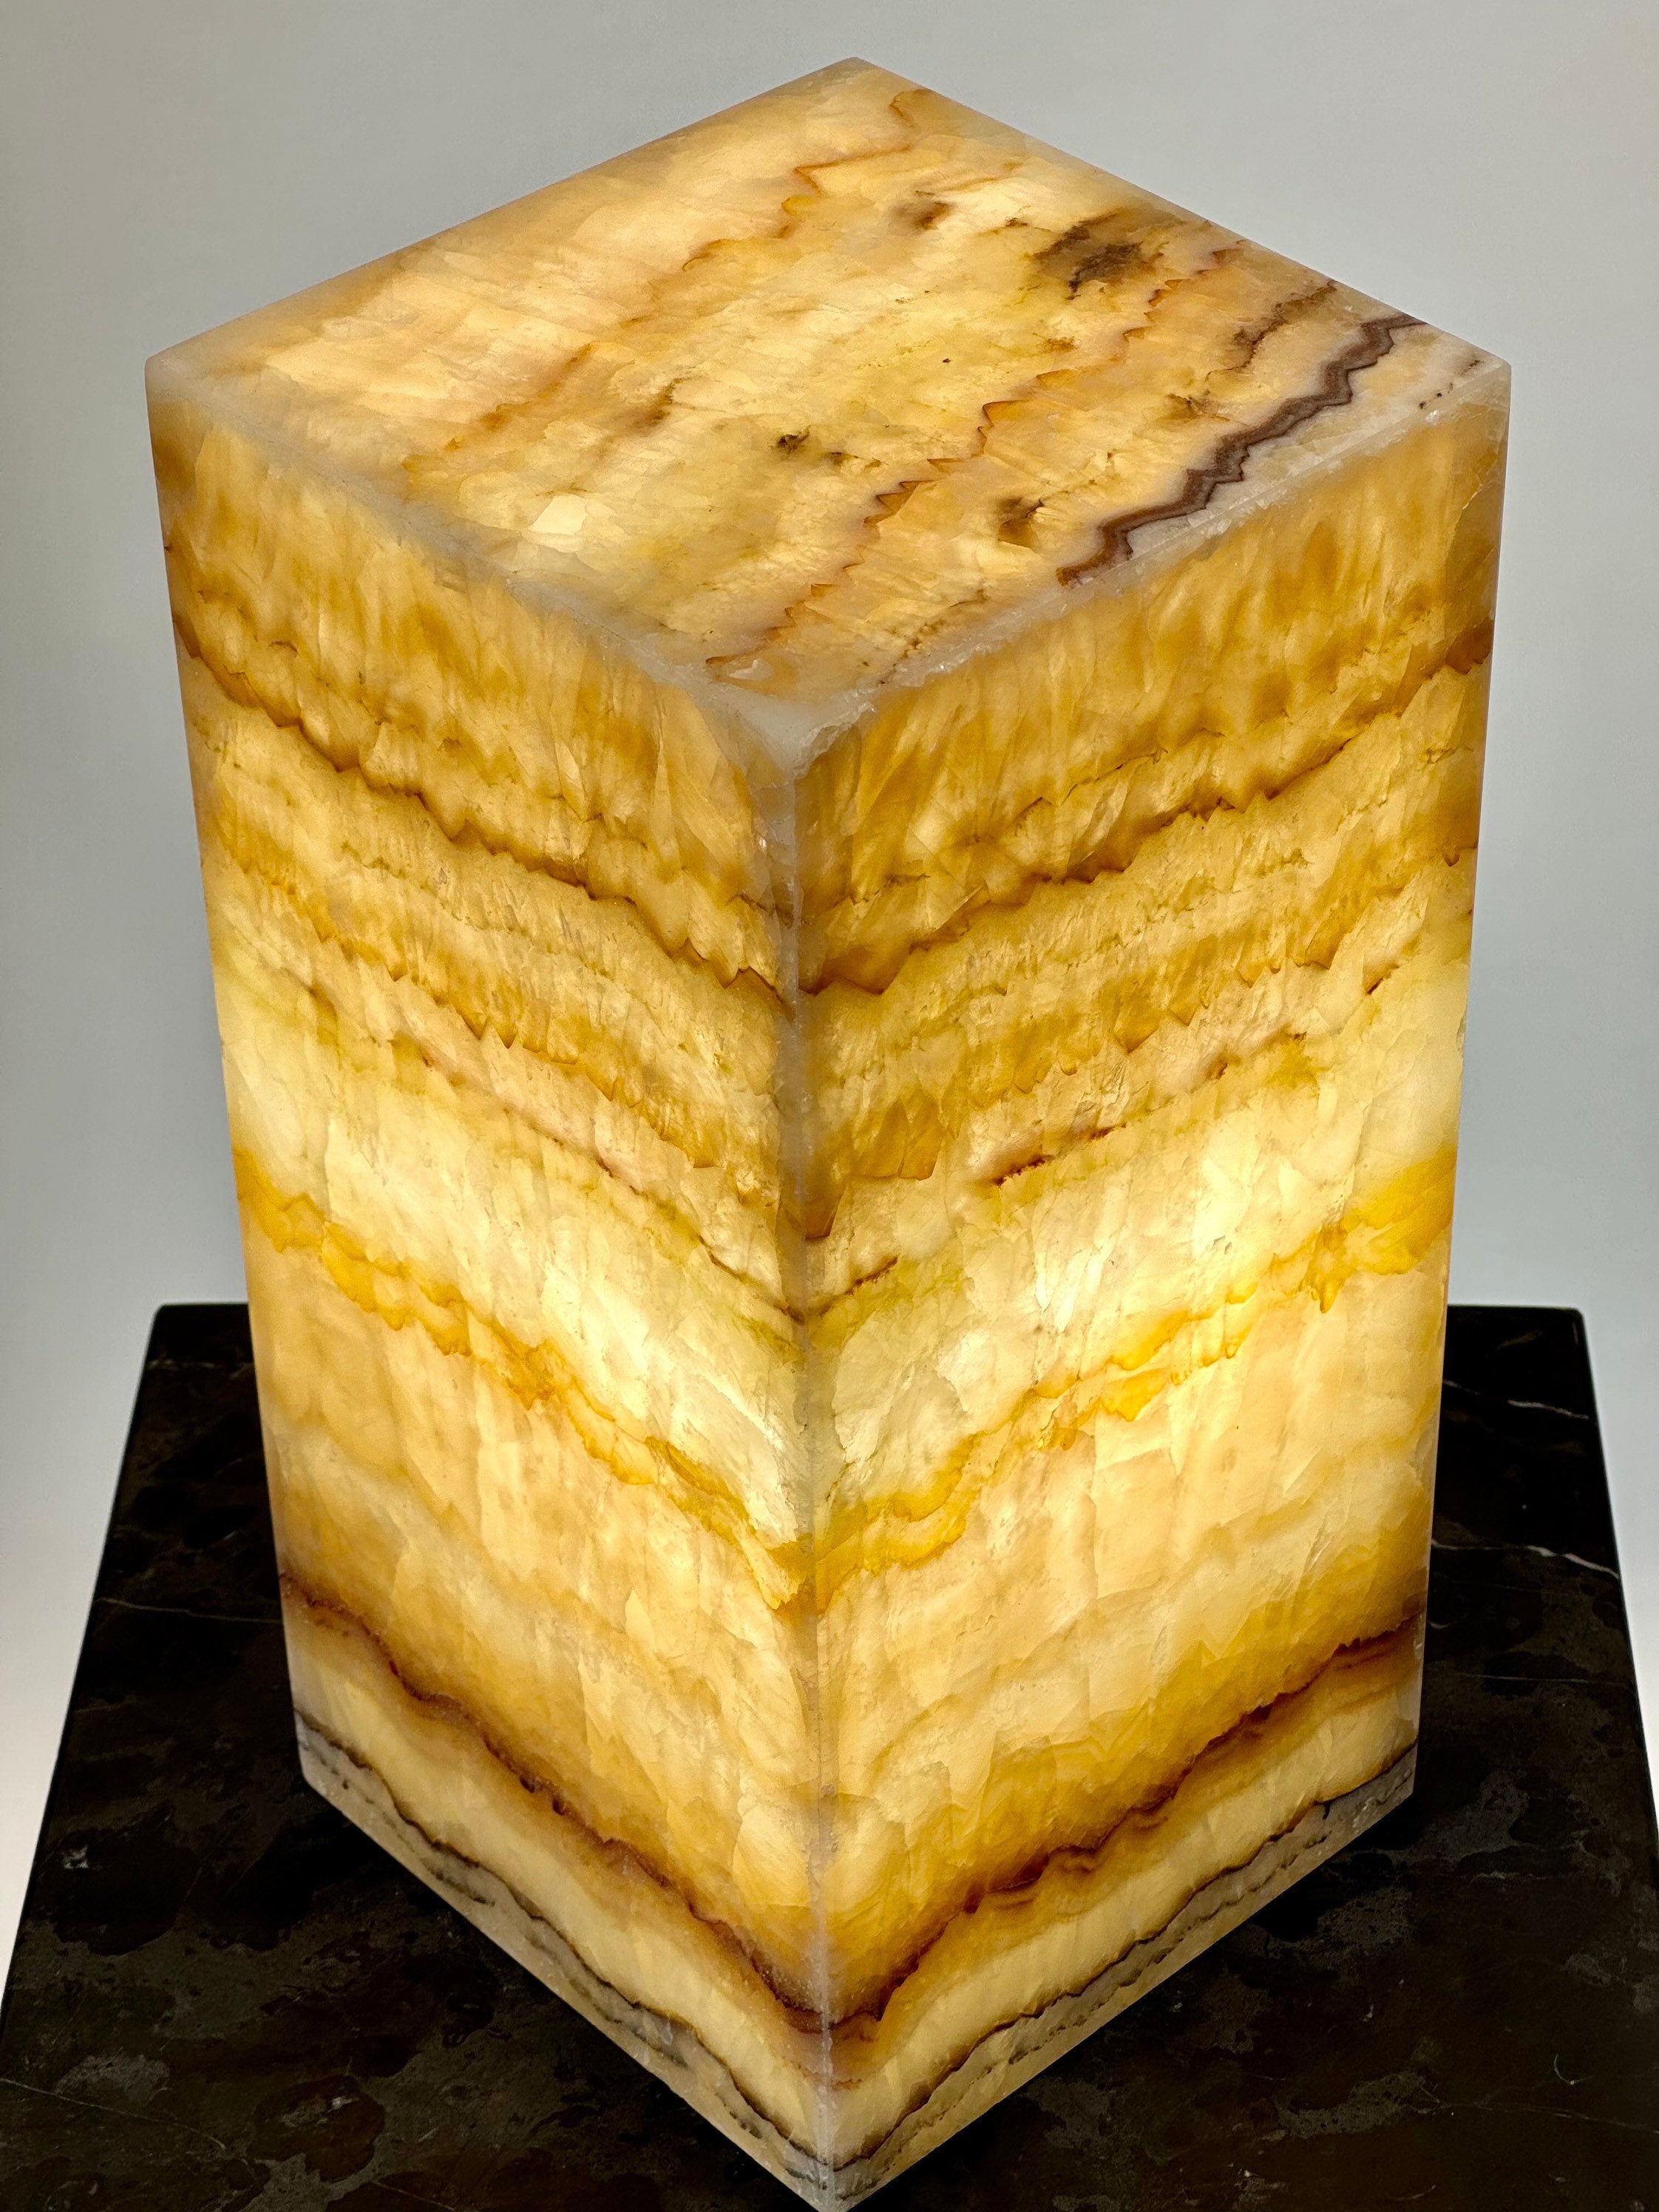 Stunning Onyx Table Lamp - Unique and Exquisite Stone Lamp for Living Room & Bedroom. An Eye-Catching Highlight for Your Home Dcor